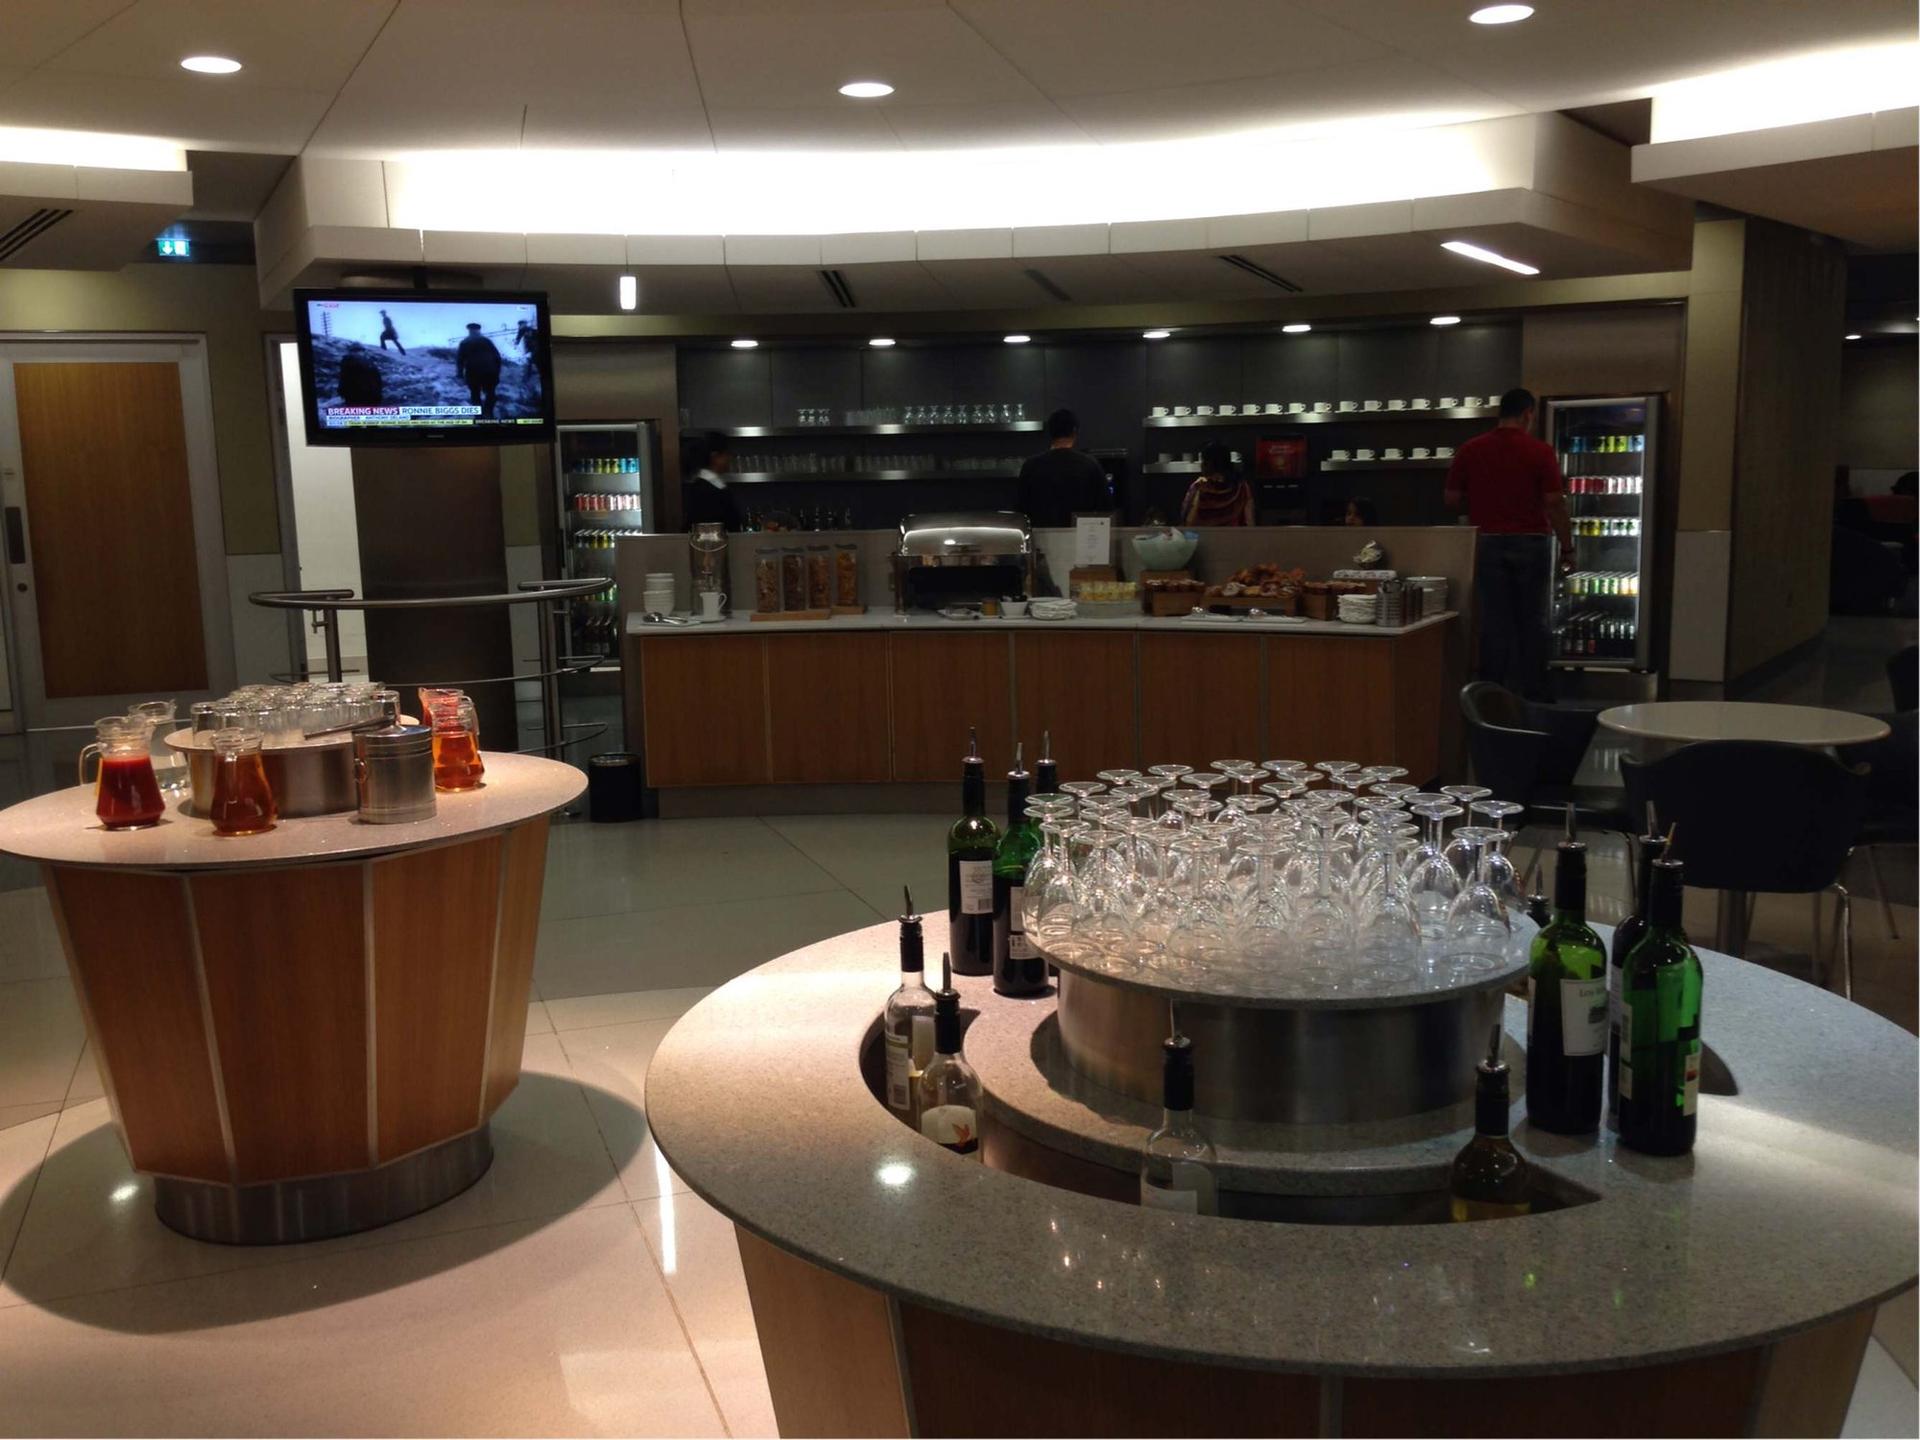 American Airlines Admirals Club image 9 of 38